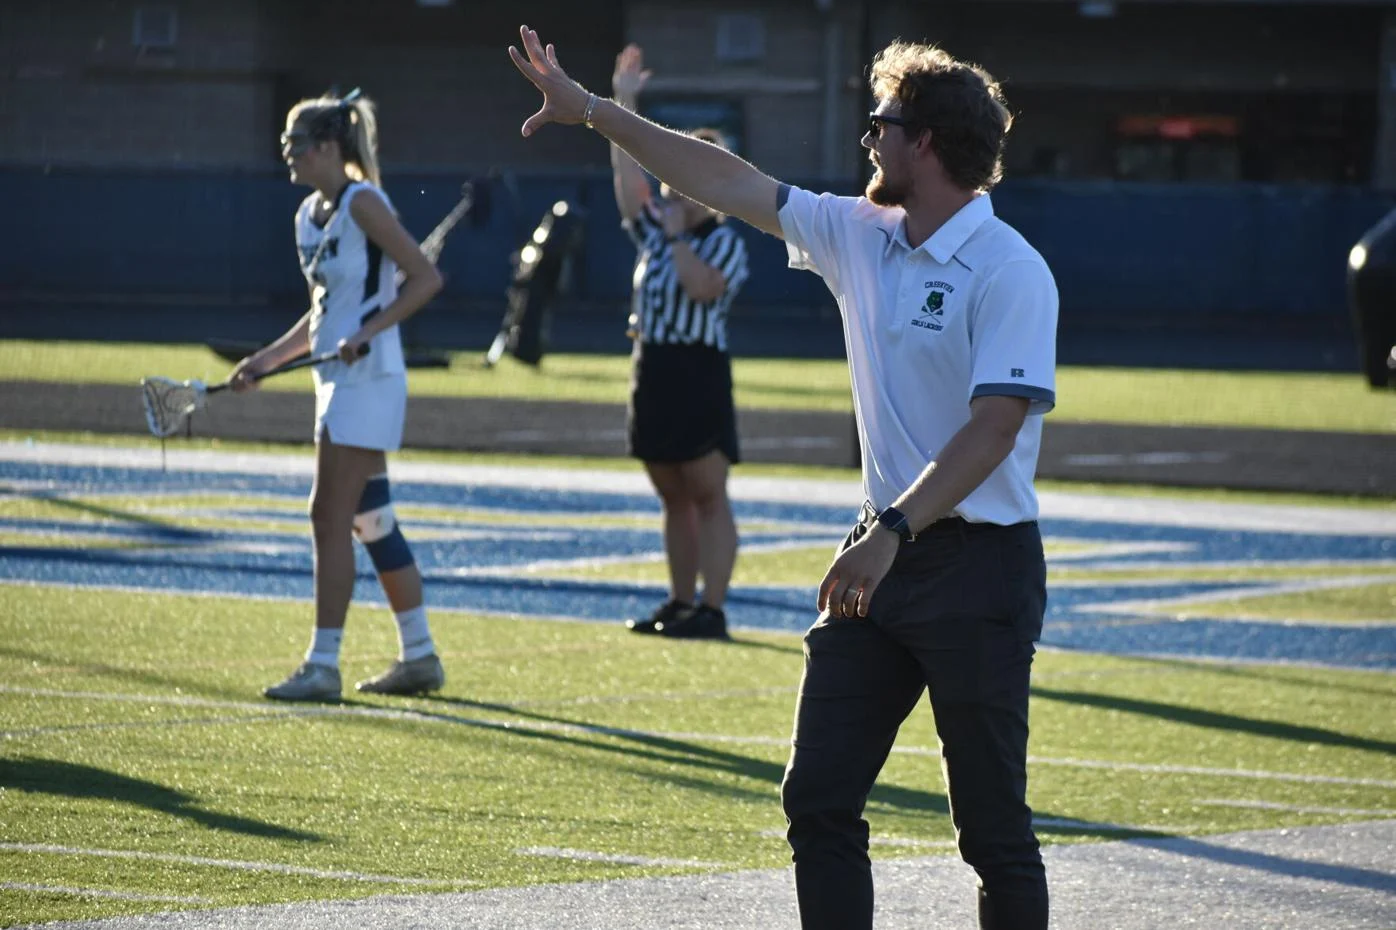 Girls Lacrosse Coach of the Year: Webb Puts Creekview on the Attack